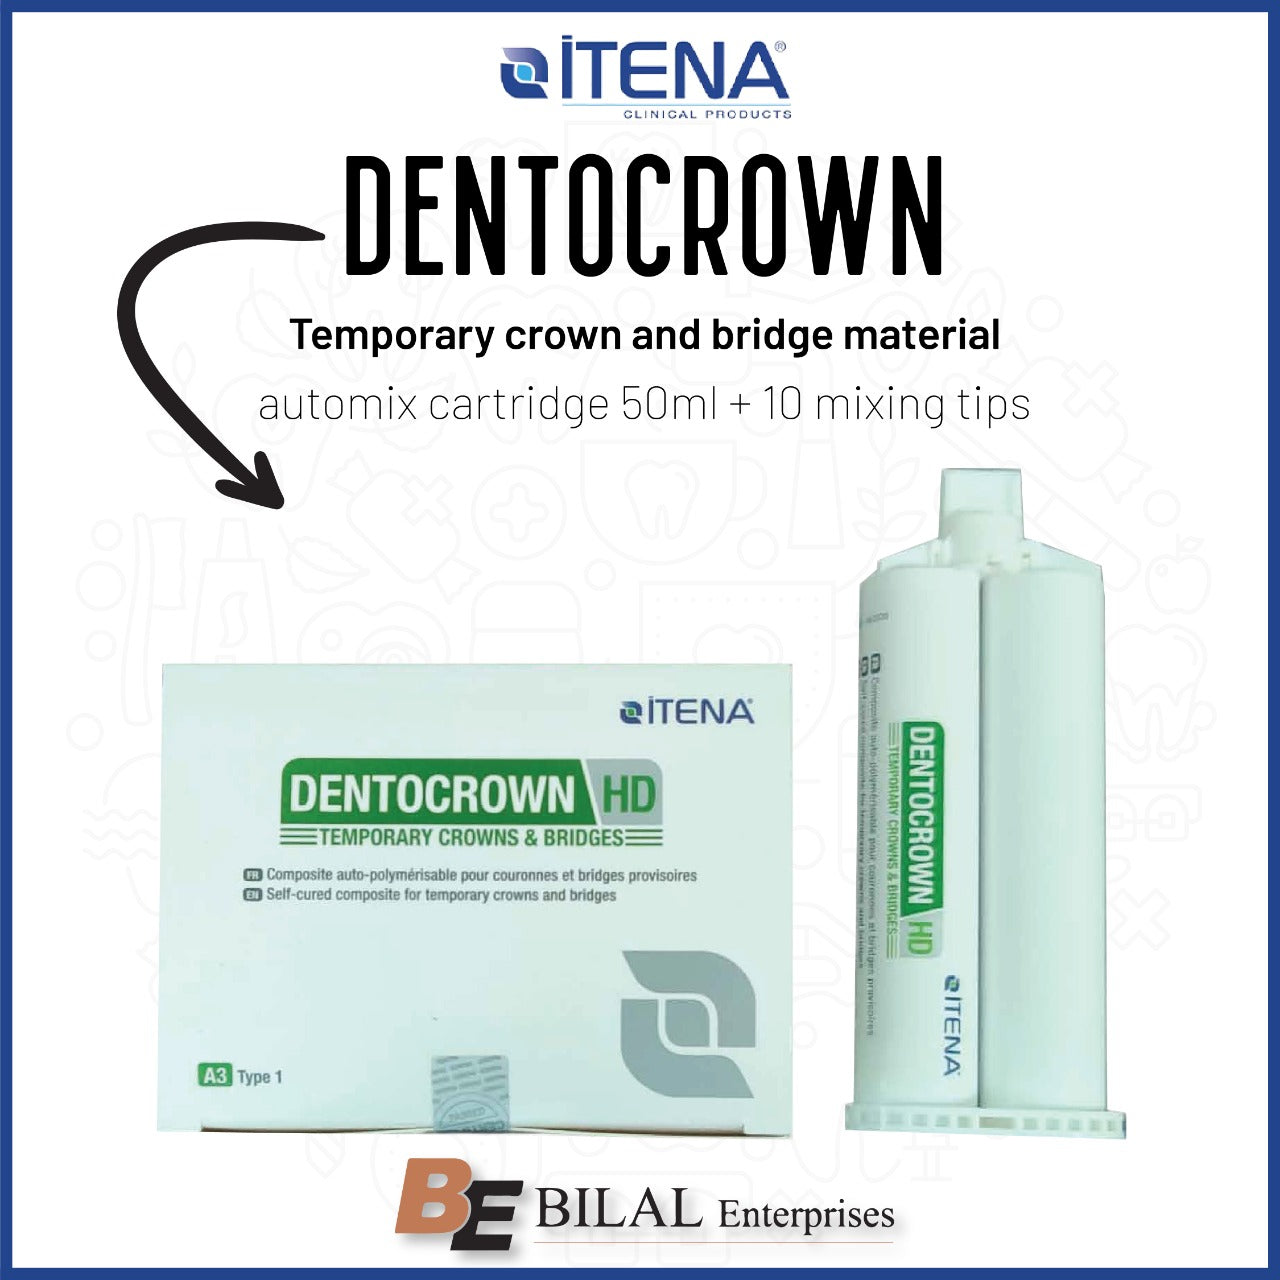 Itena Clinical - DentoCrown (temporary crown and bridge material)